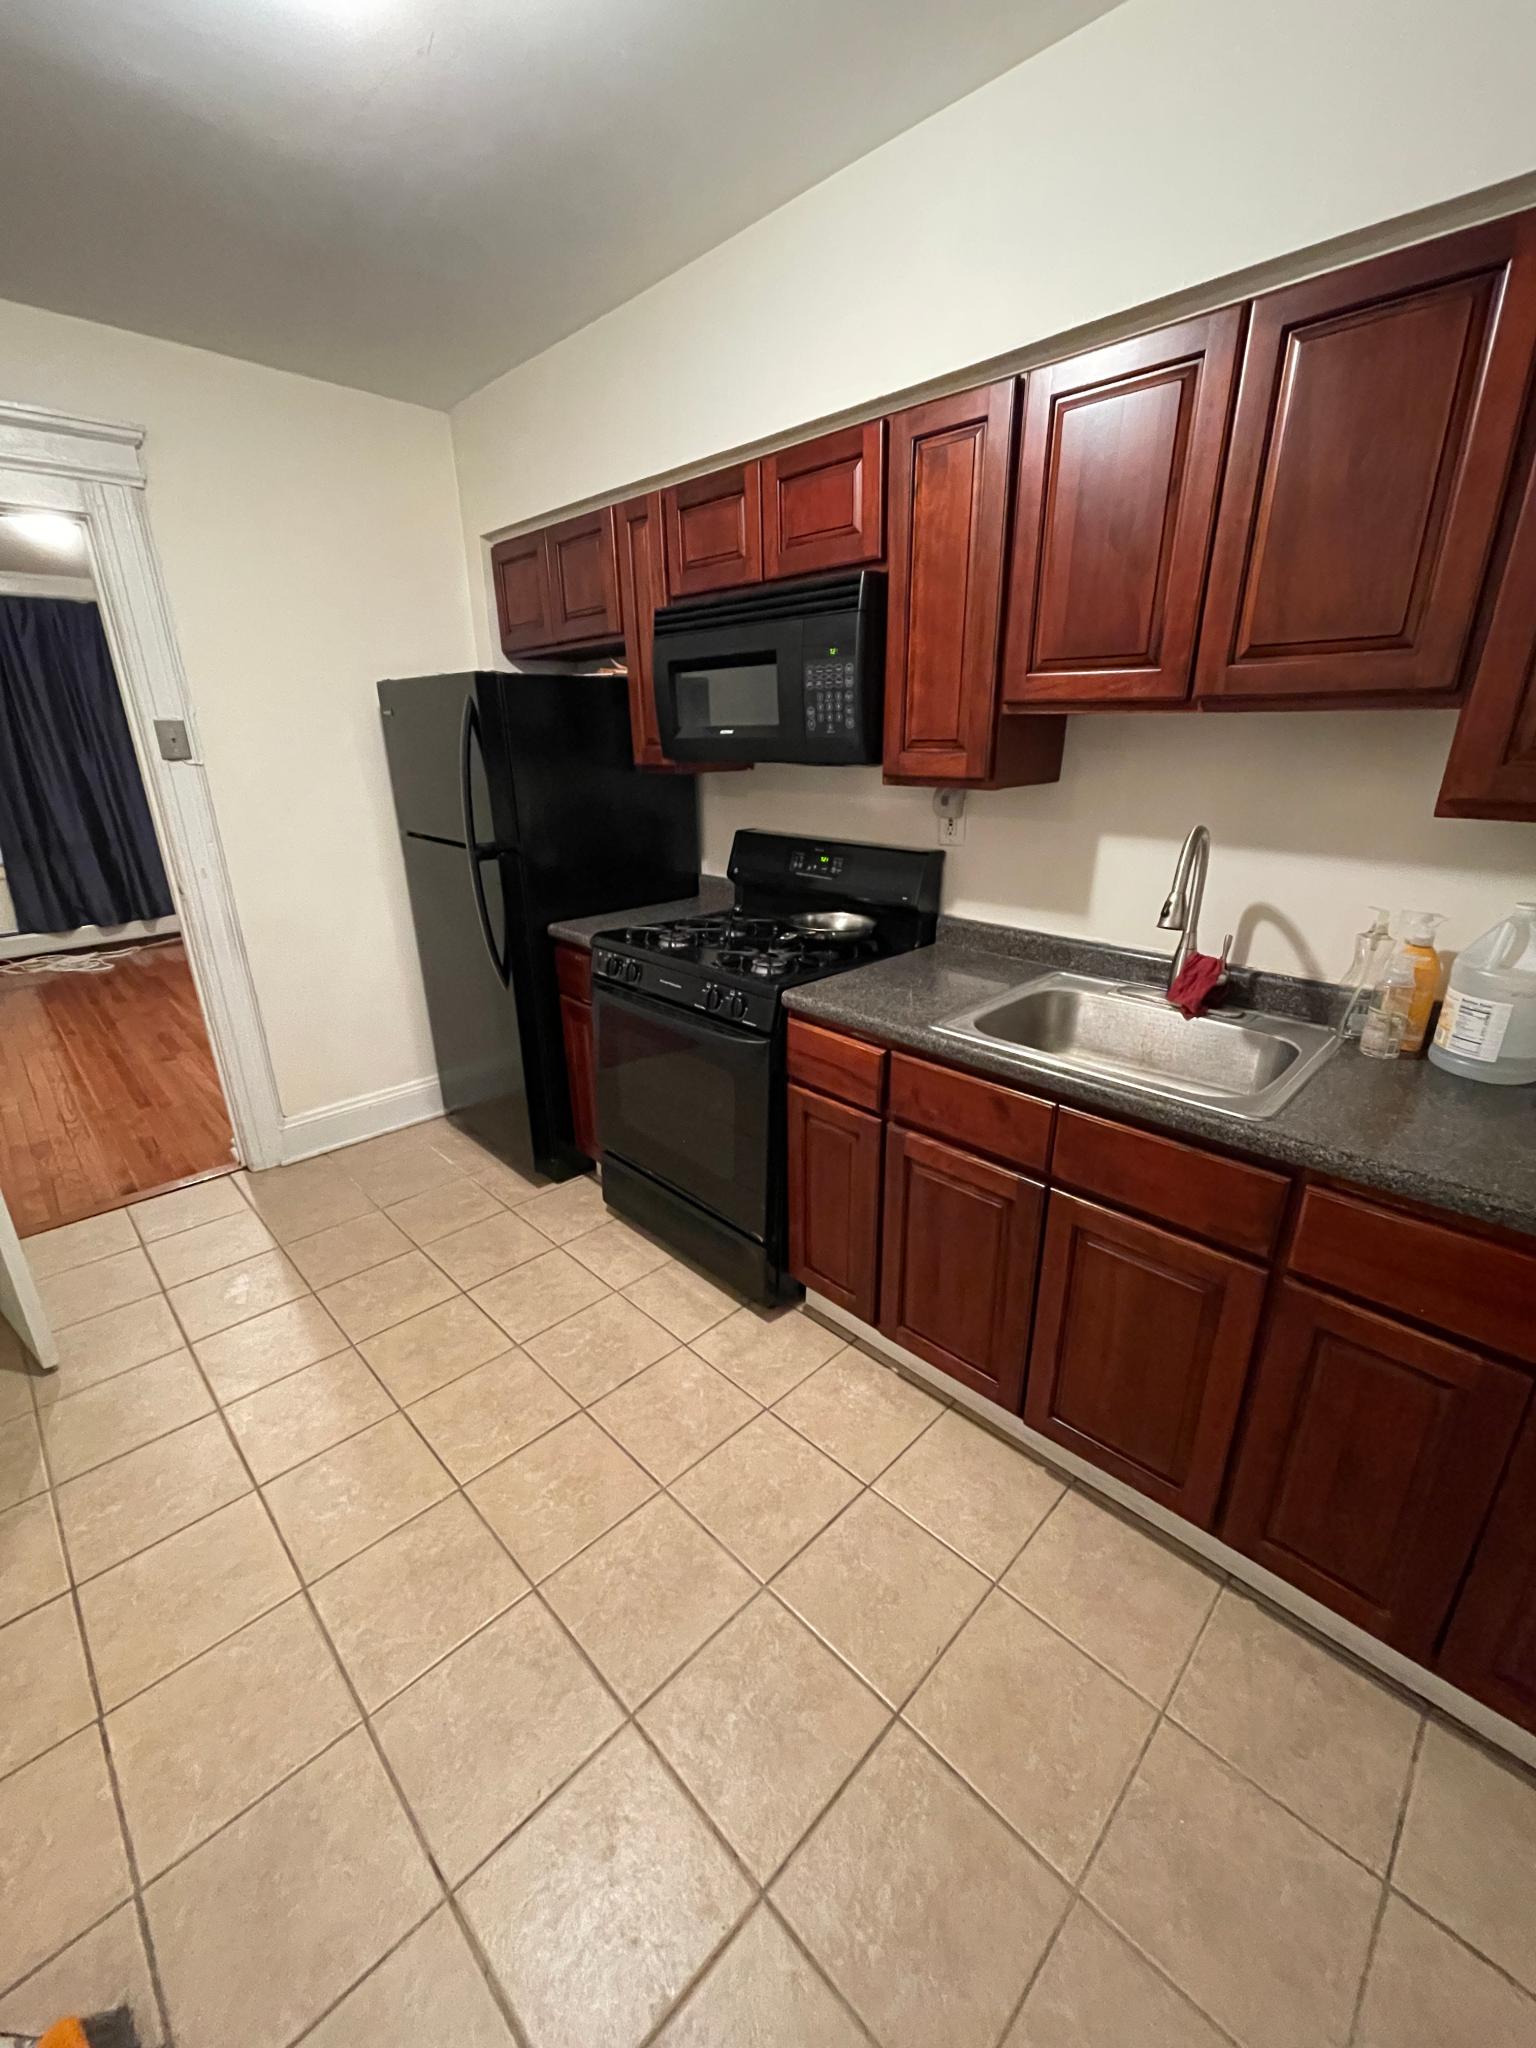 One bed one bath in a great location in Union City. Property features nice hardwood floors, well kept appliances, nice boxy layout and a huge walk in closet. Unit is on a raised 1st floor in the back of the building (not off the street). Sorry no pets. Broker fee of 1 month paid by tenant. Available 4/1.